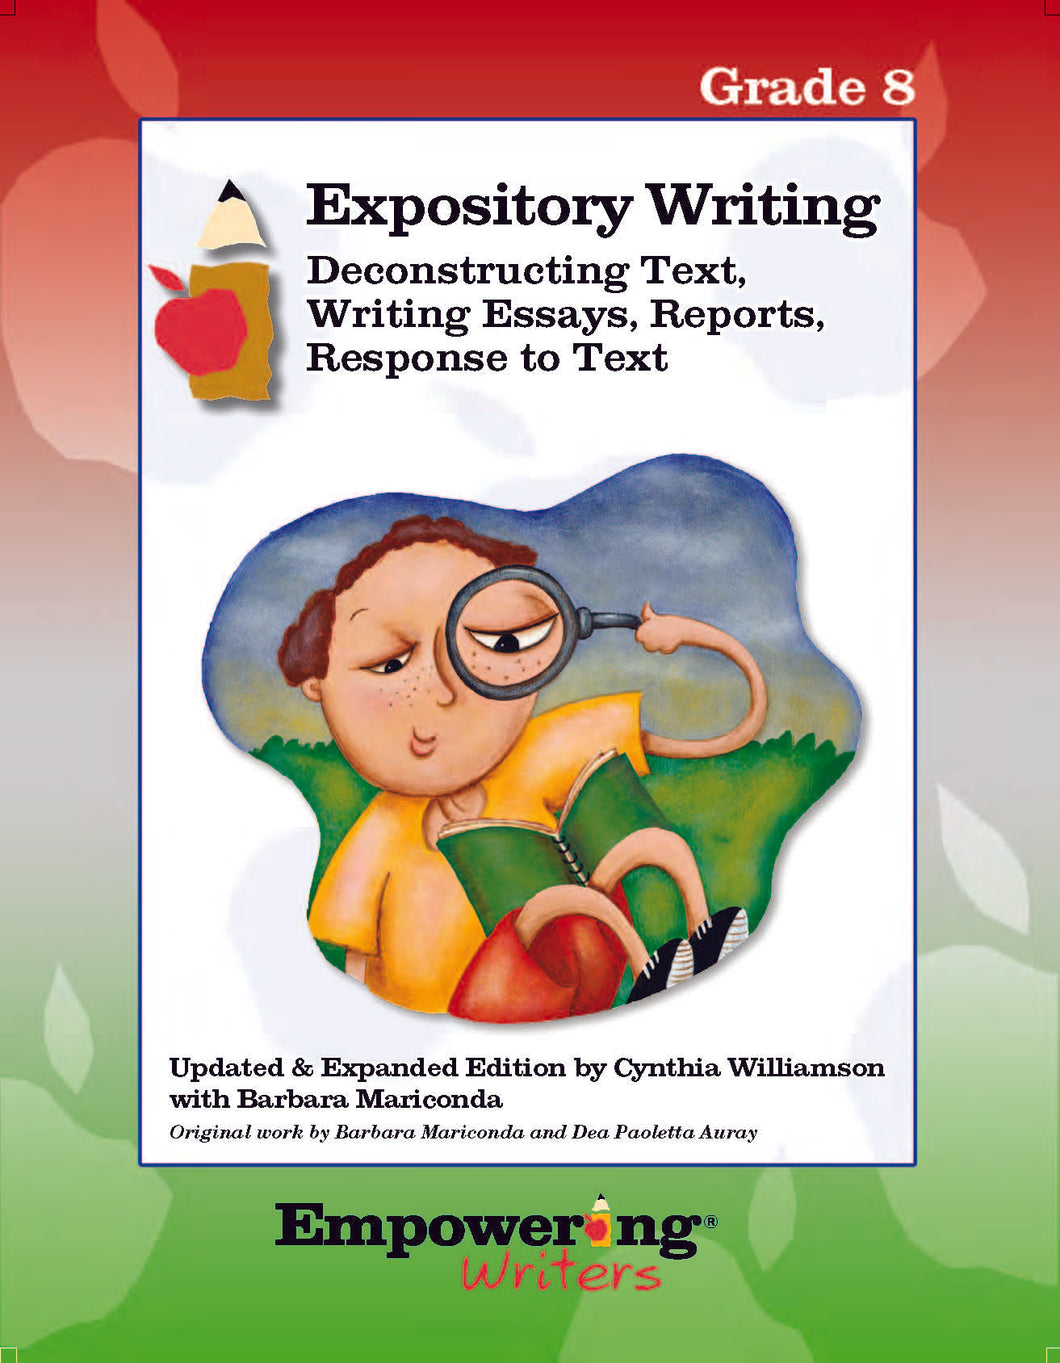 Grade 8 Informational/Expository Writing Guide (printed) - U.S.